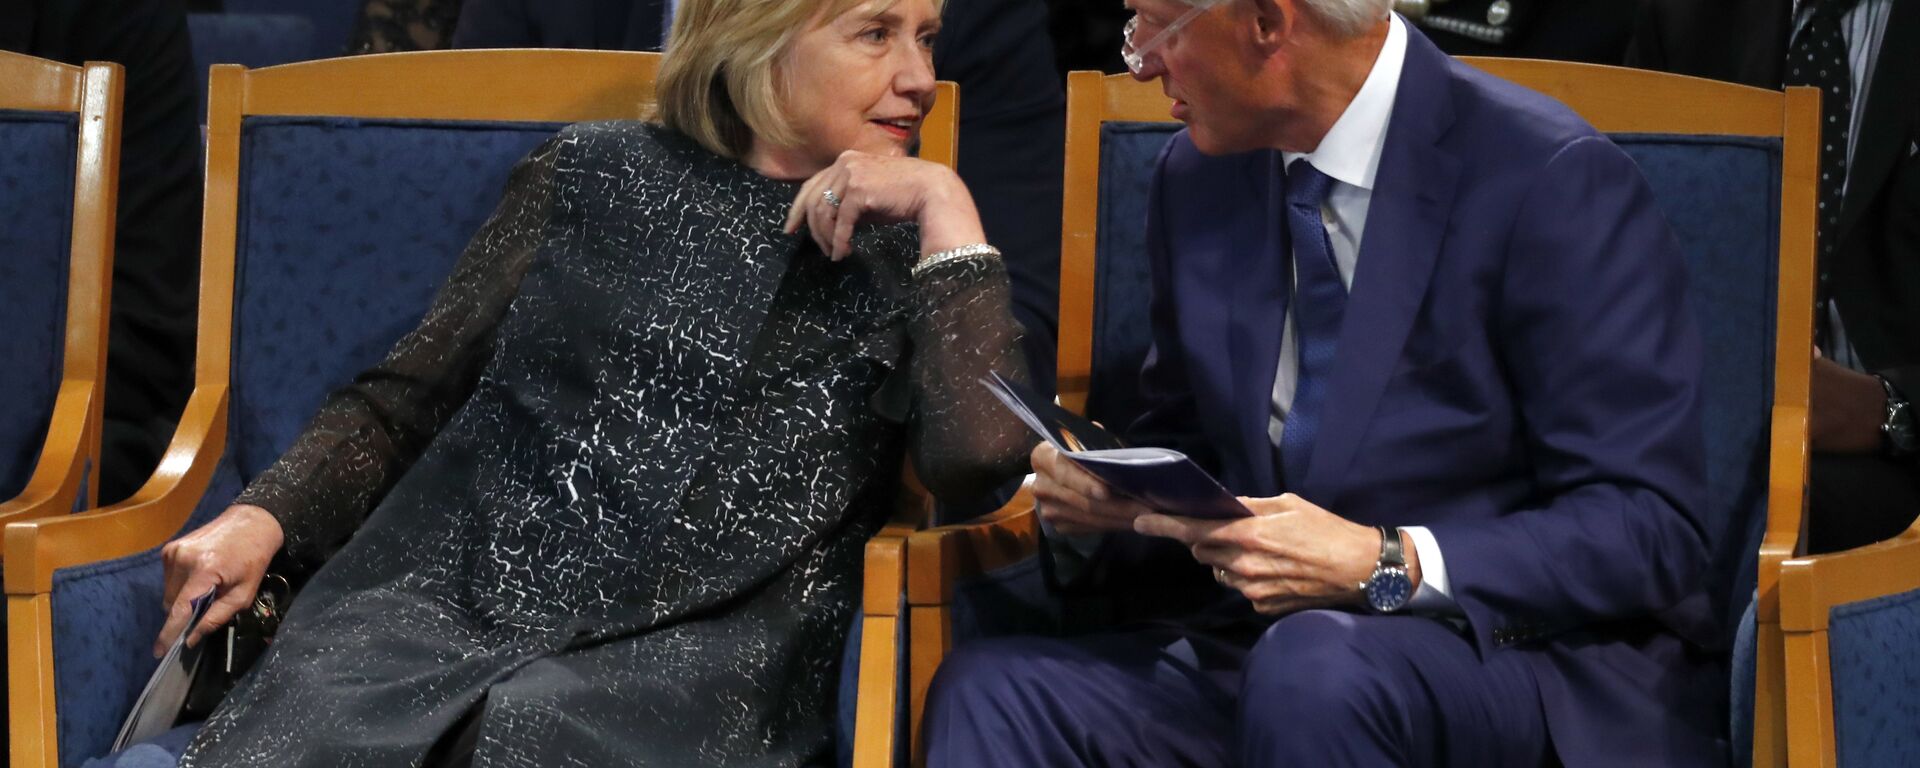 Former President Bill Clinton and wife Hillary Clinton, left, talking during the funeral service for Aretha Franklin at Greater Grace Temple, Friday, Aug. 31, 2018, in Detroit - Sputnik International, 1920, 09.12.2020